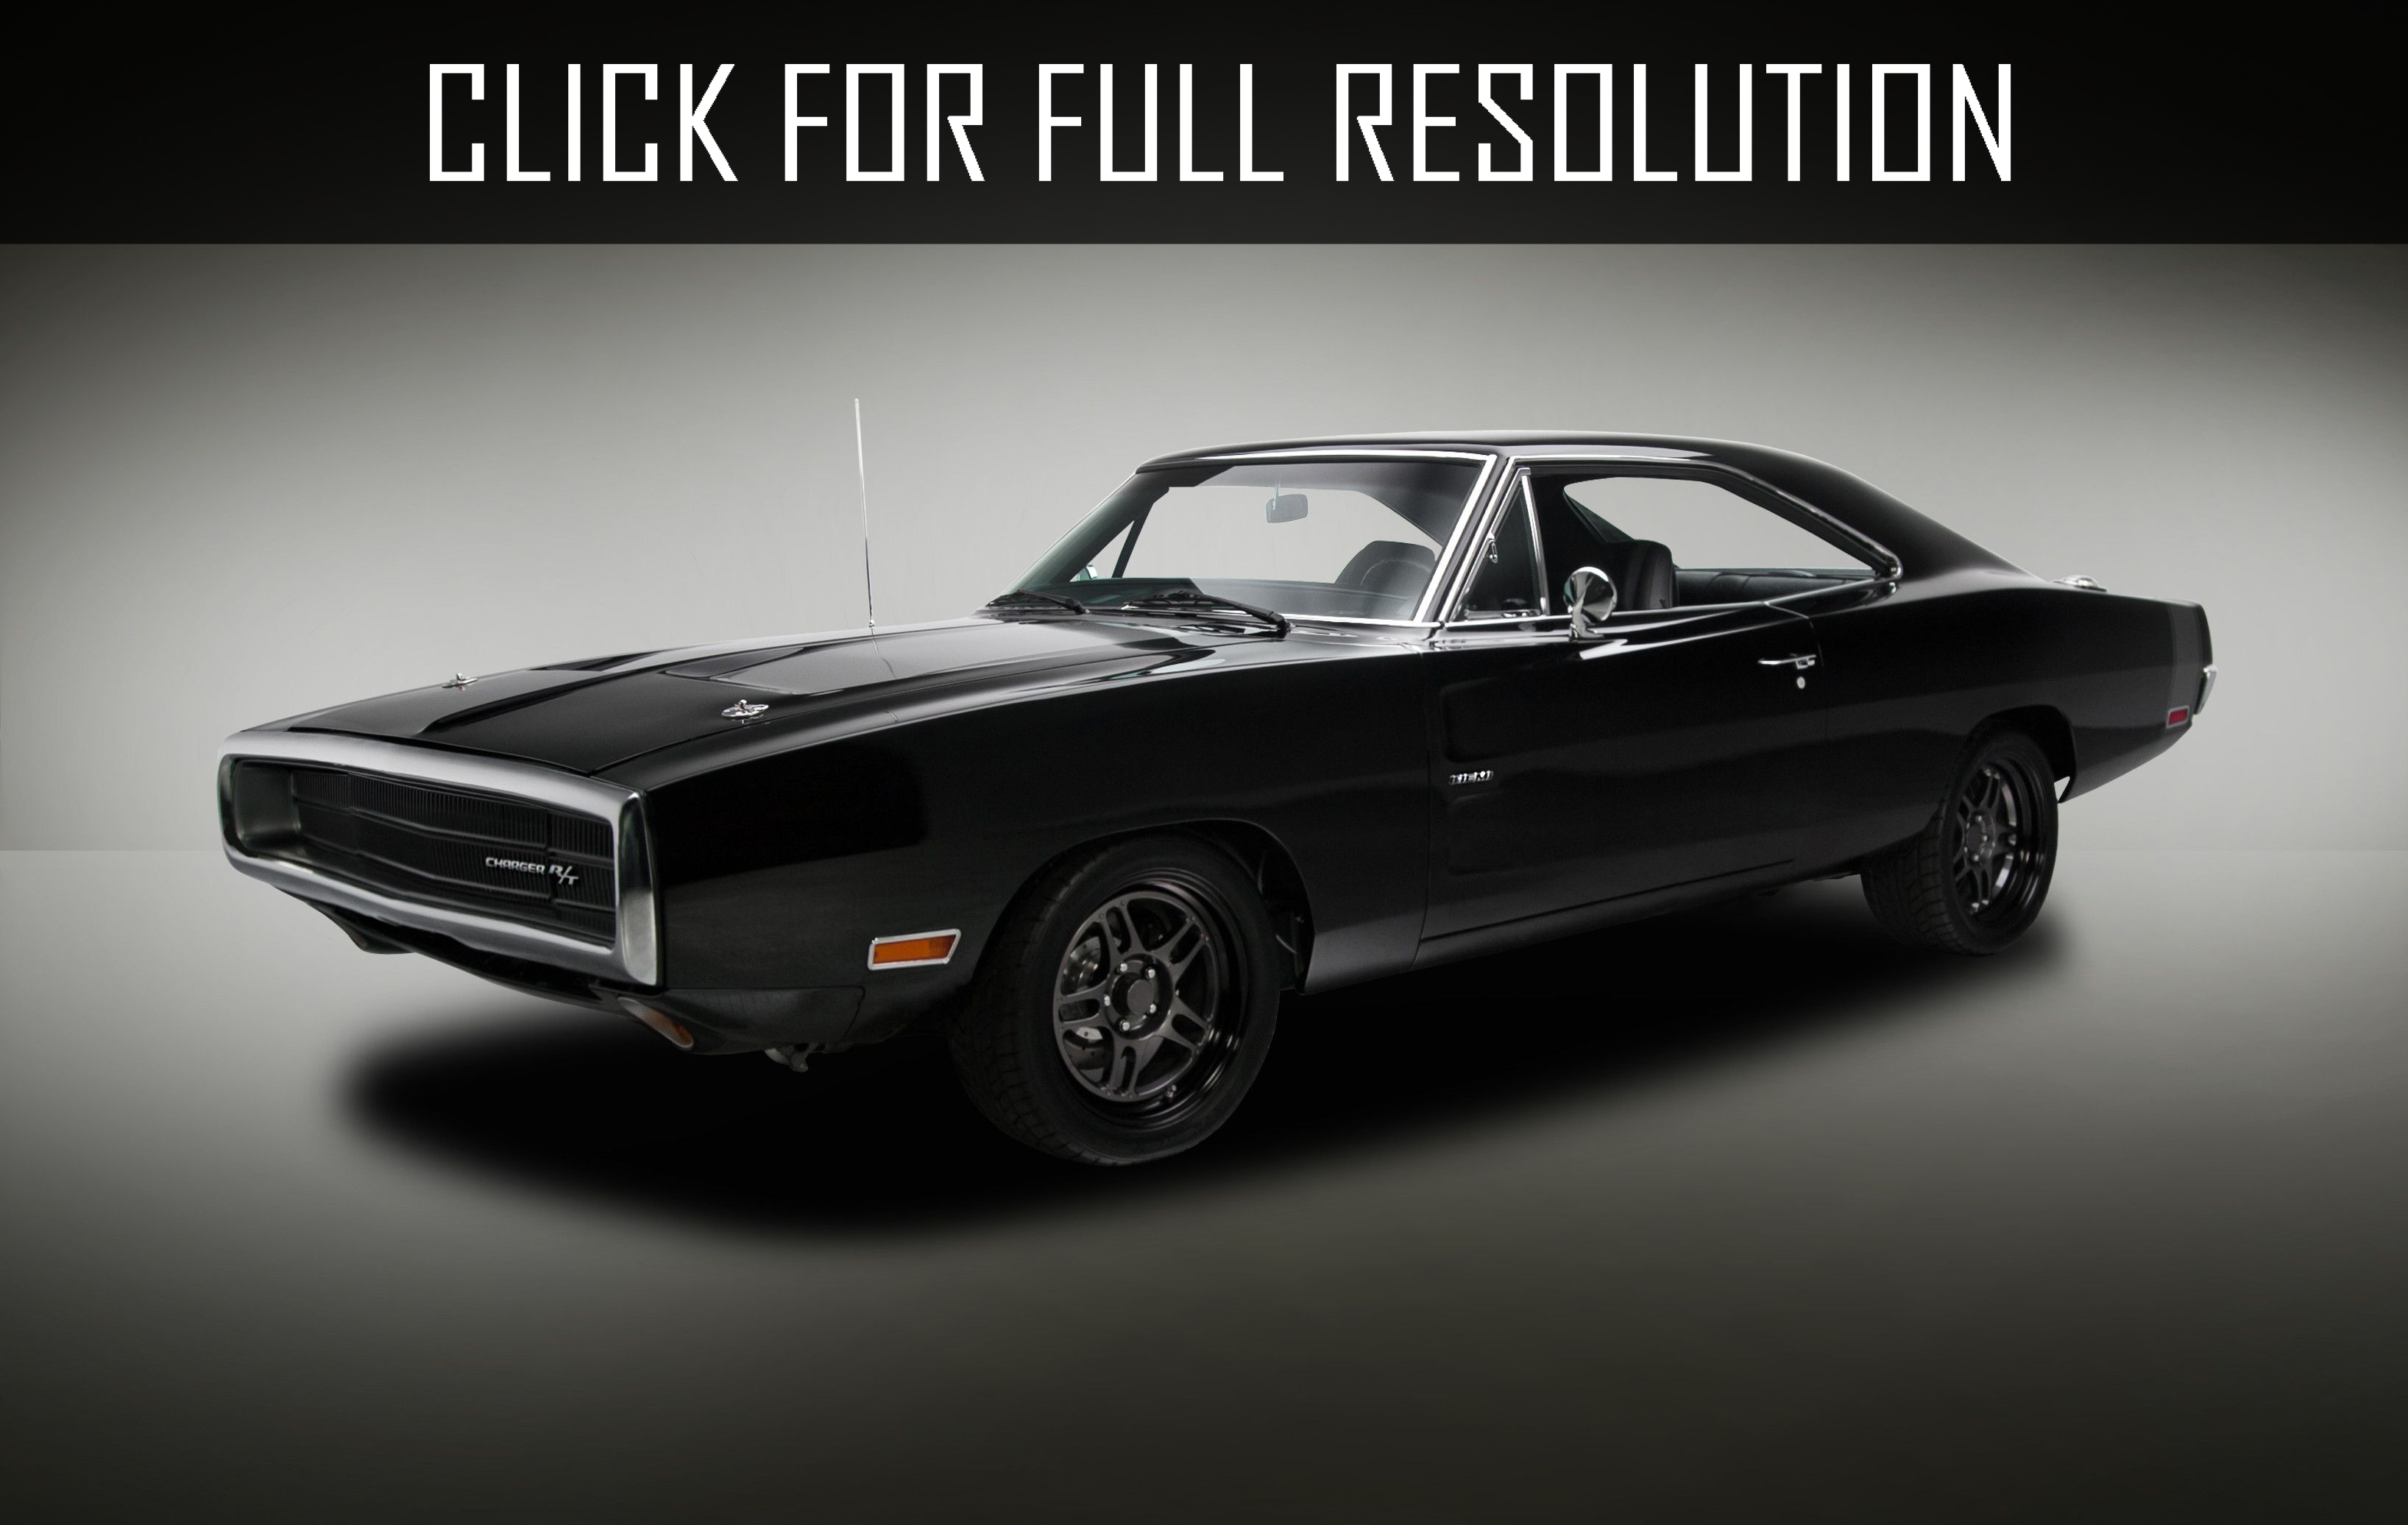 1970 Dodge Charger Rt best image gallery #5/14 - share and download